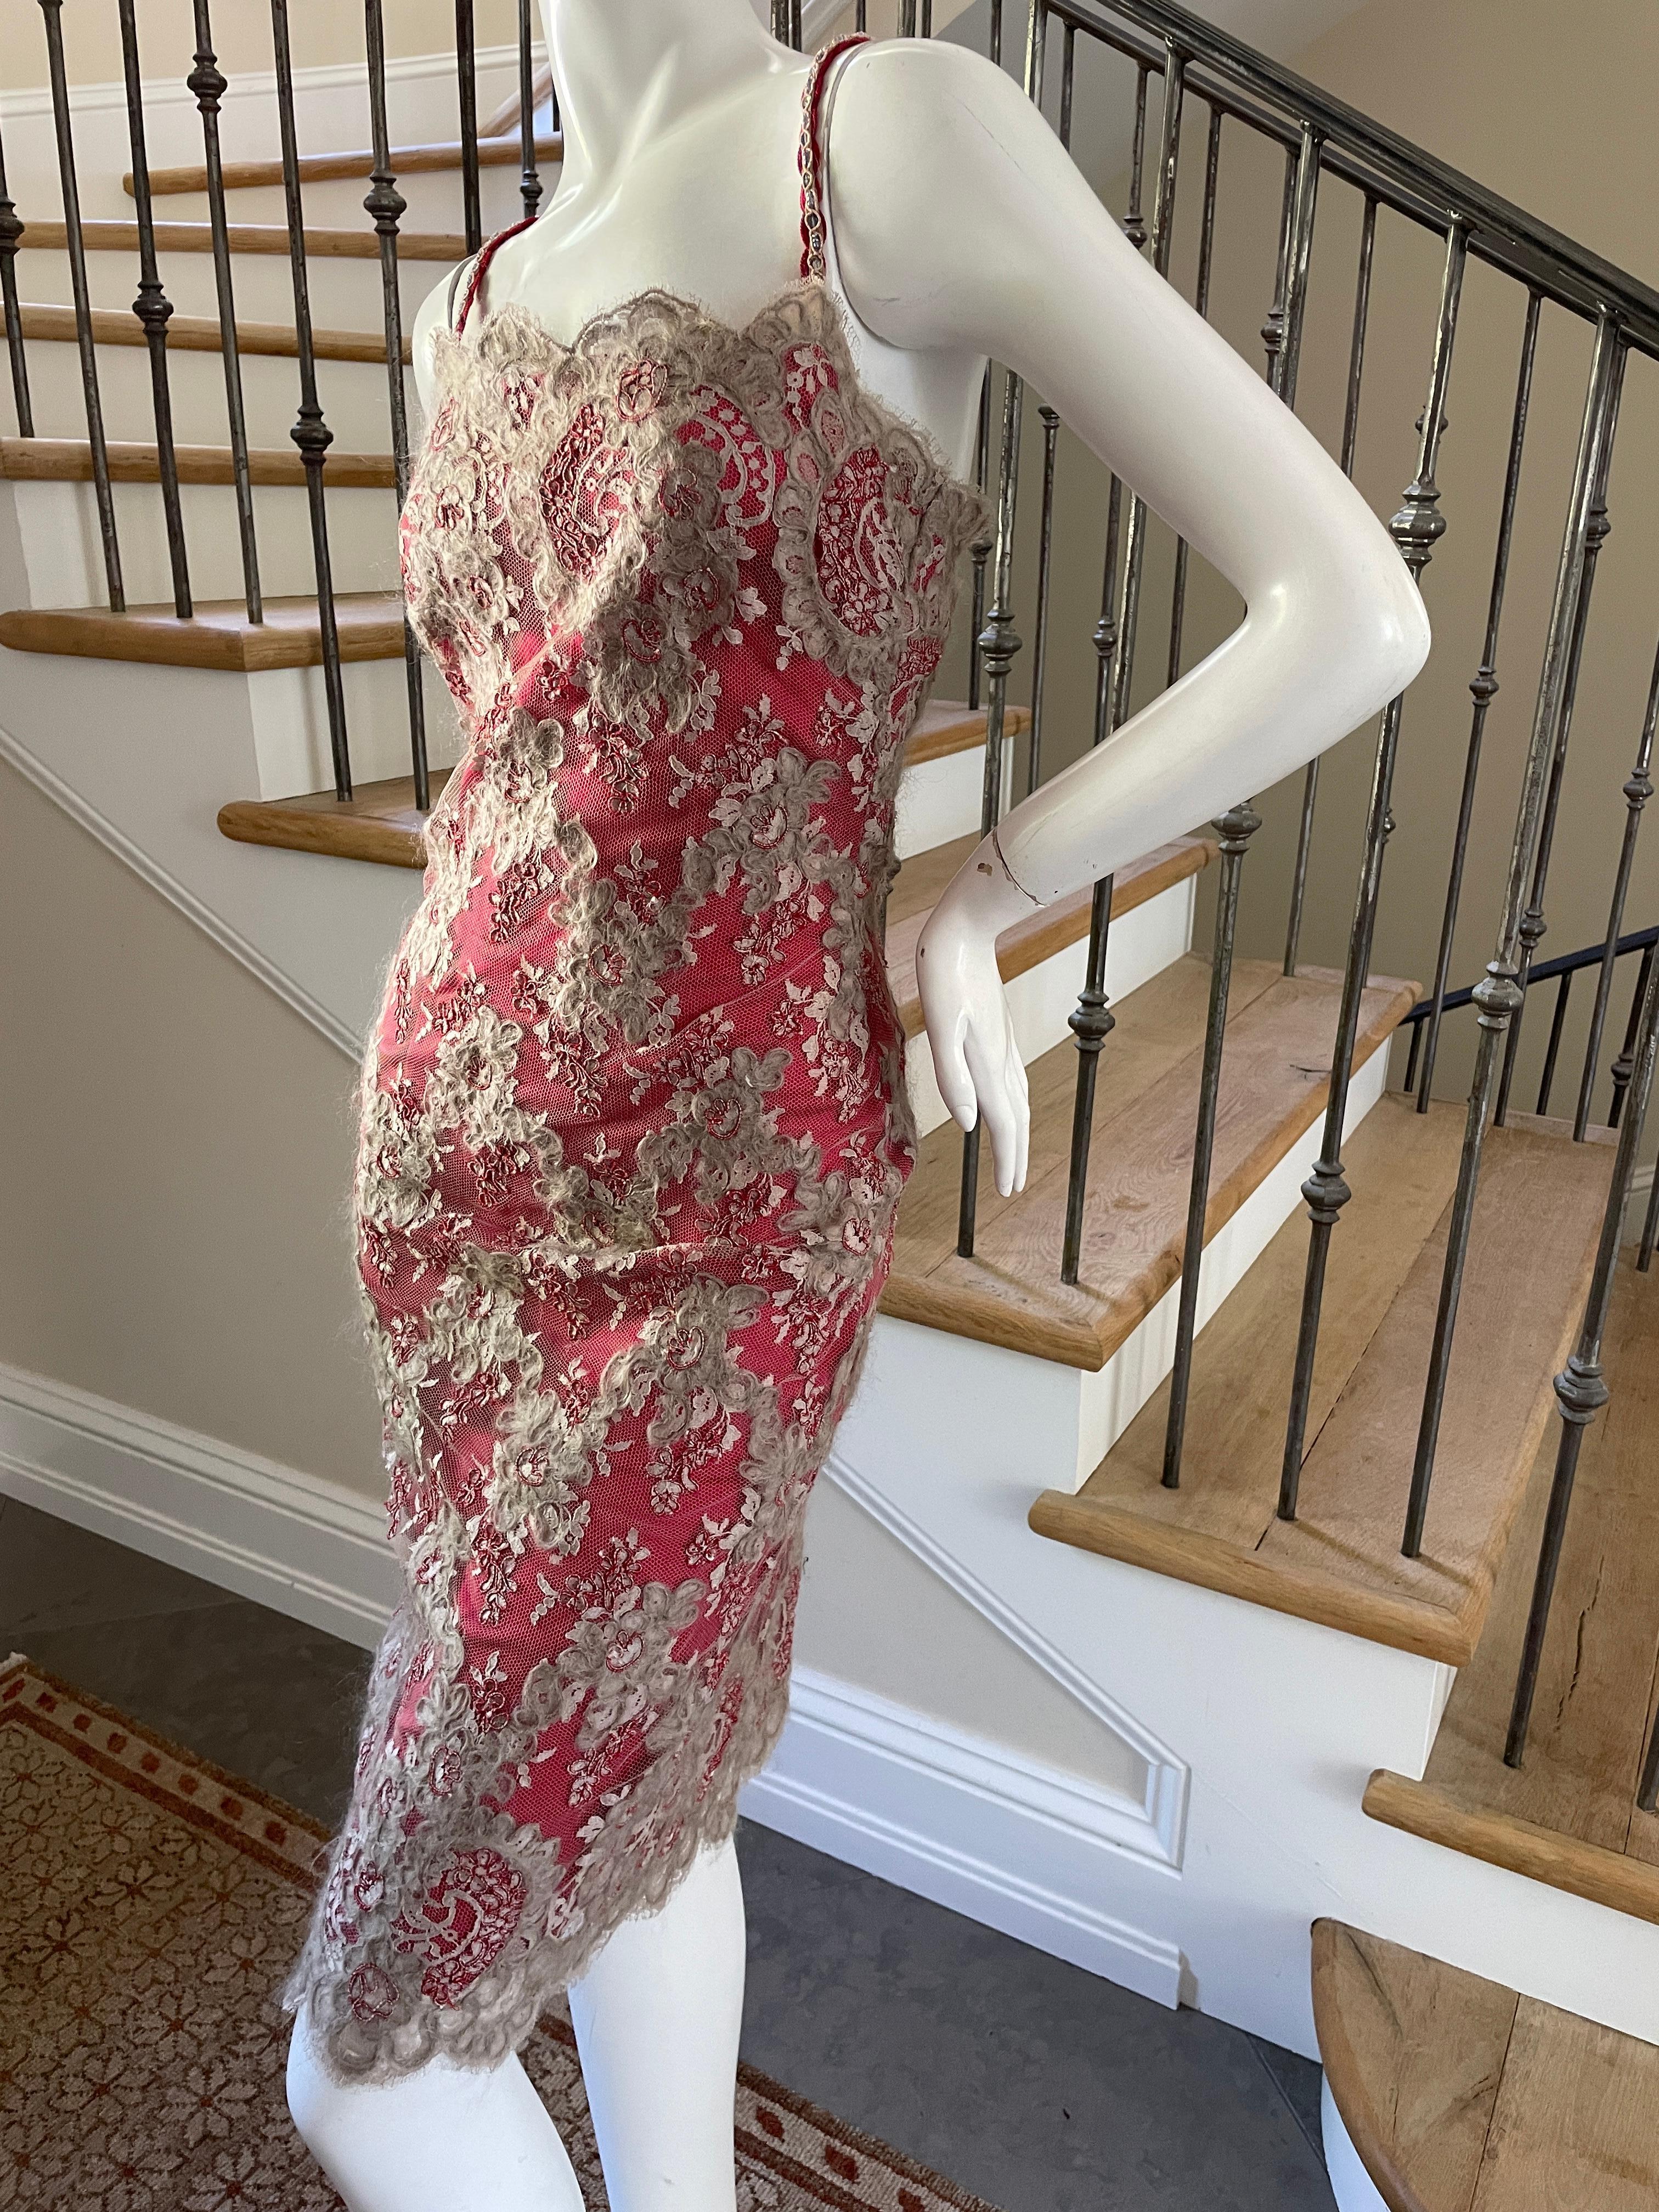 Bill Blass for Bergdorf Goodman Vintage Pink Embellished Lace Cocktail Dress NWT In New Condition For Sale In Cloverdale, CA